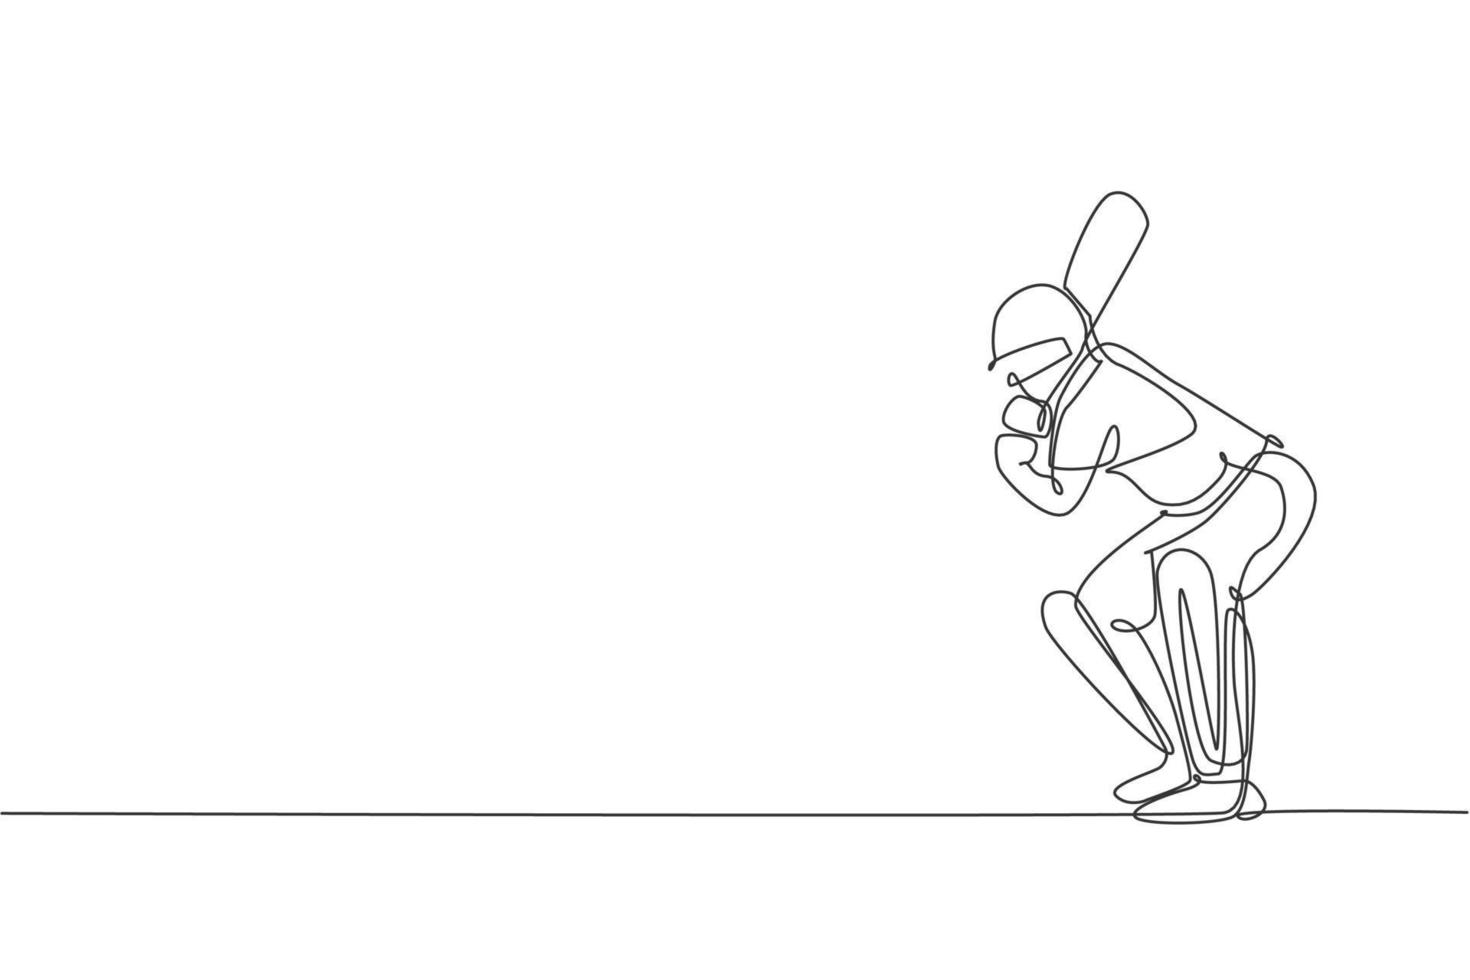 One continuous line drawing of young man cricket player stance standing to receive the ball from pitcher vector illustration. Sport concept. Dynamic single line draw design for advertisement poster